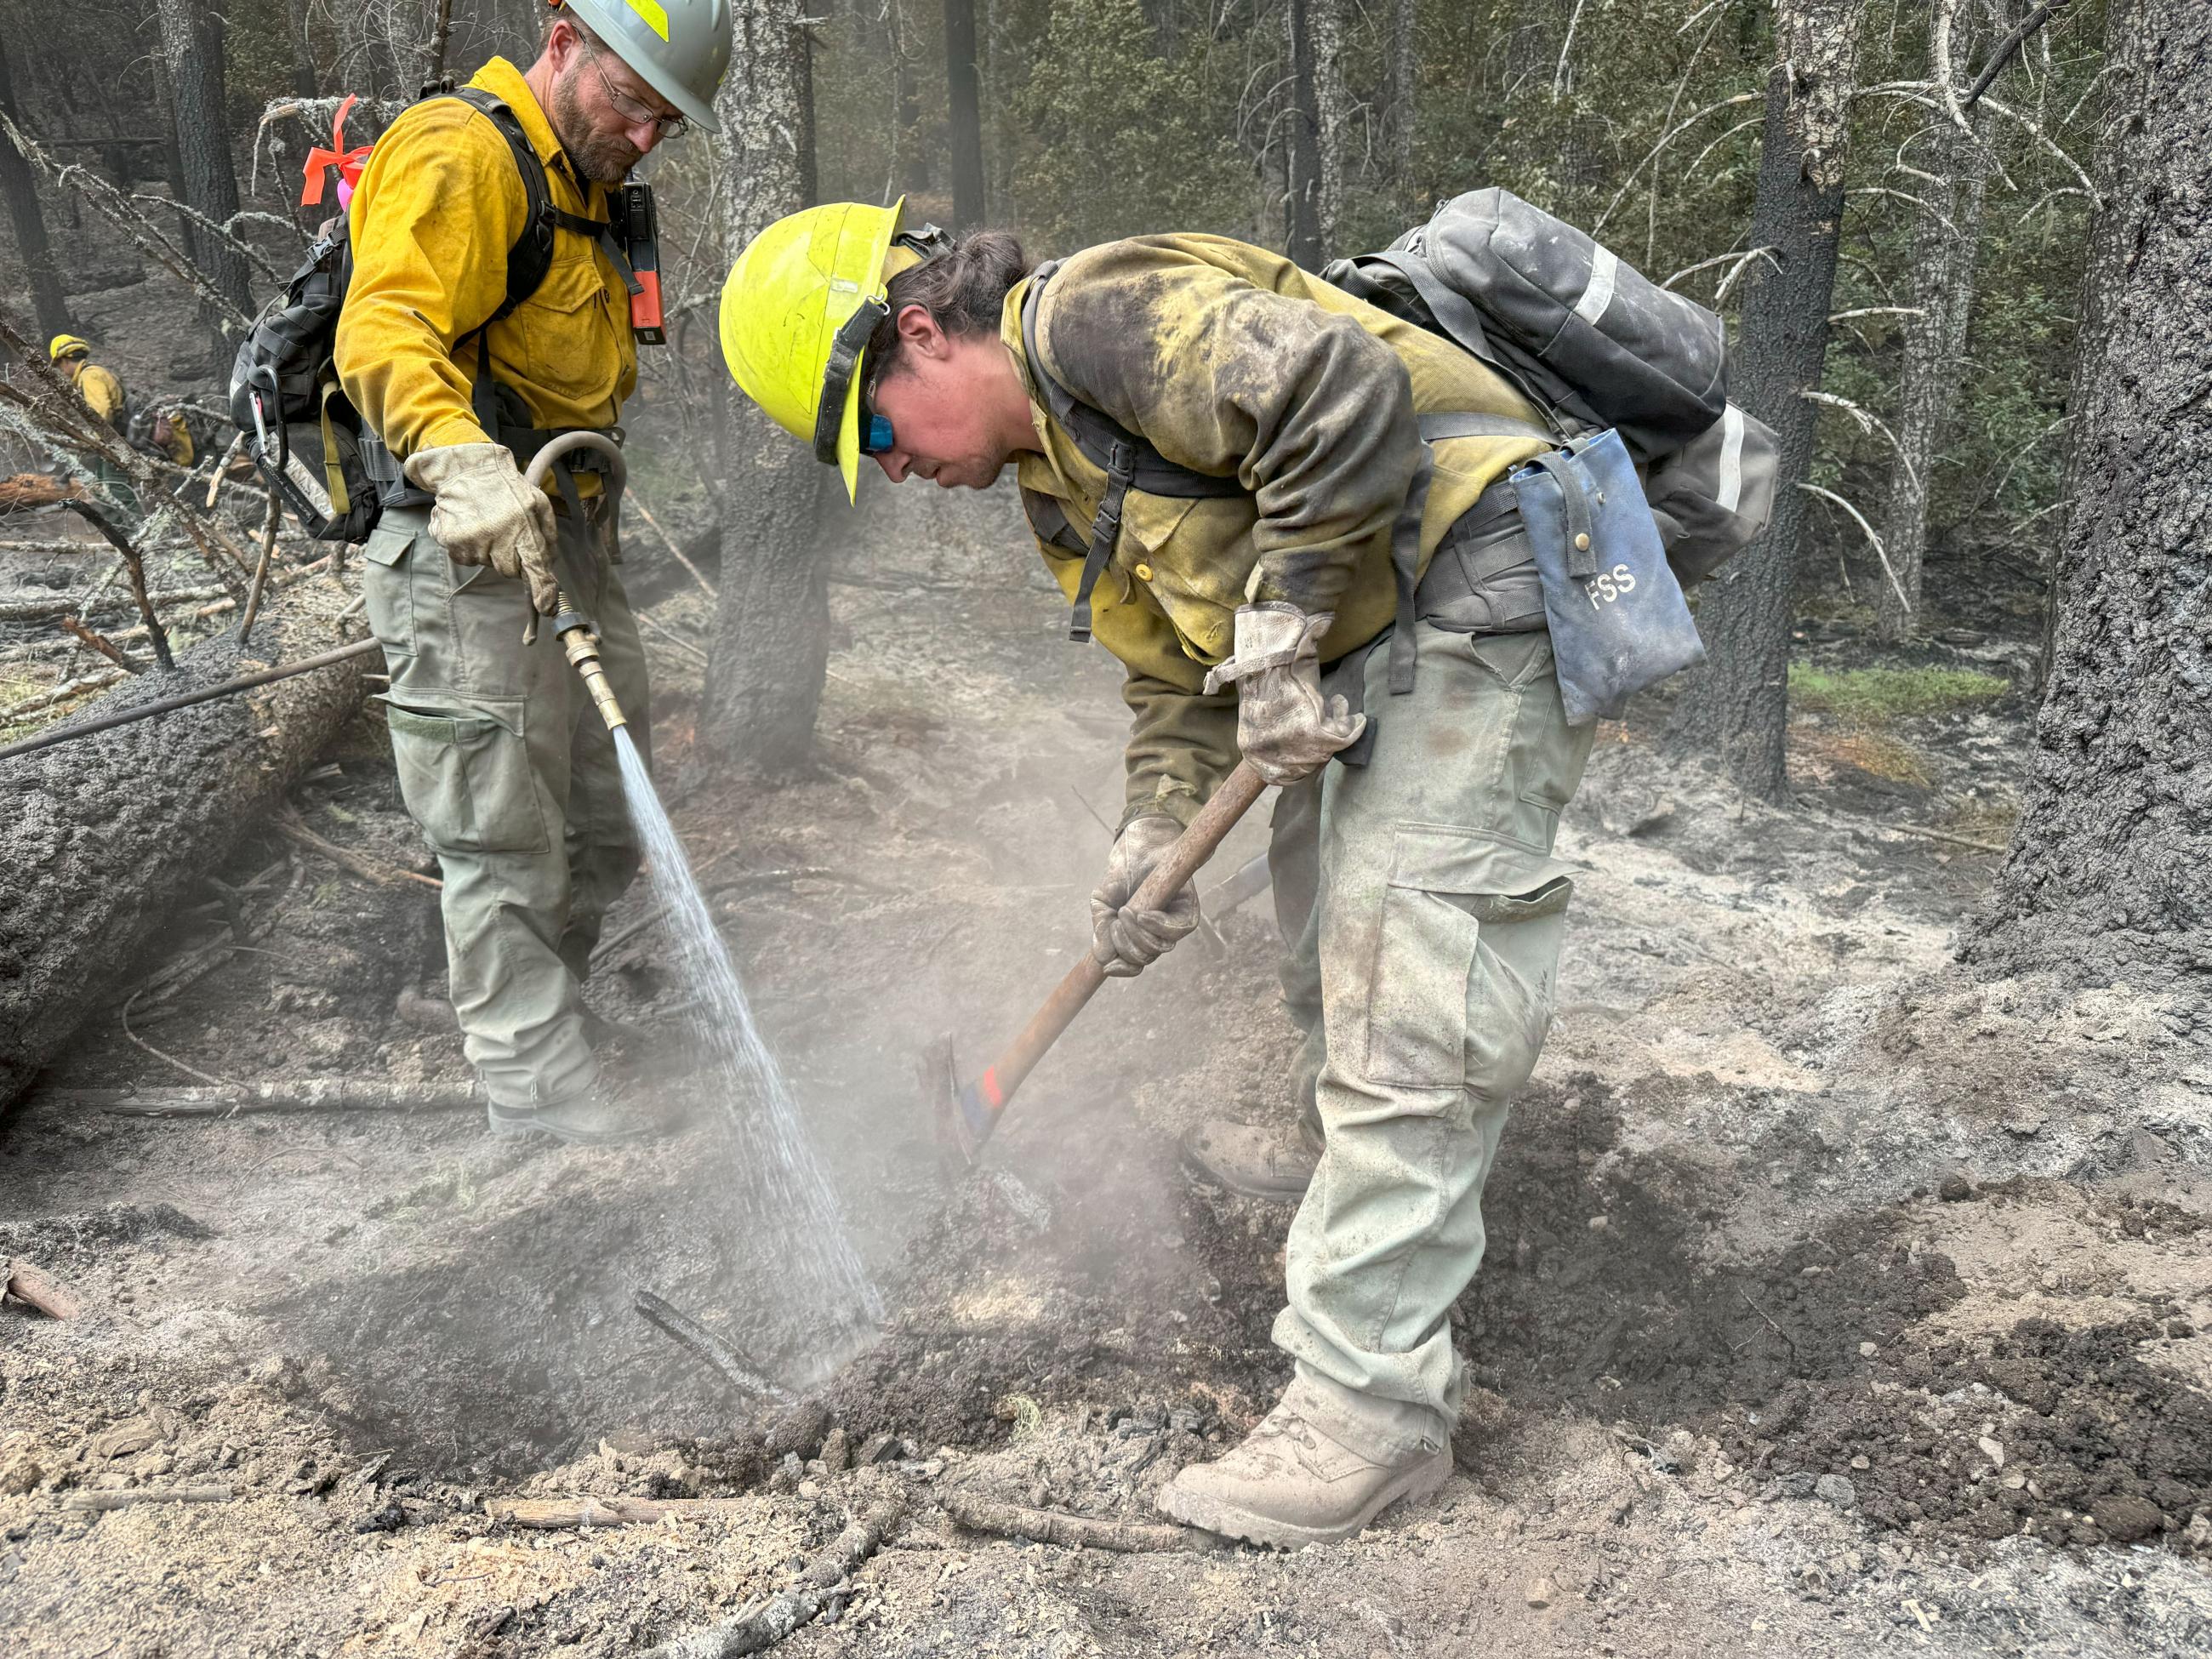 firefighters are working along side the road in the forest